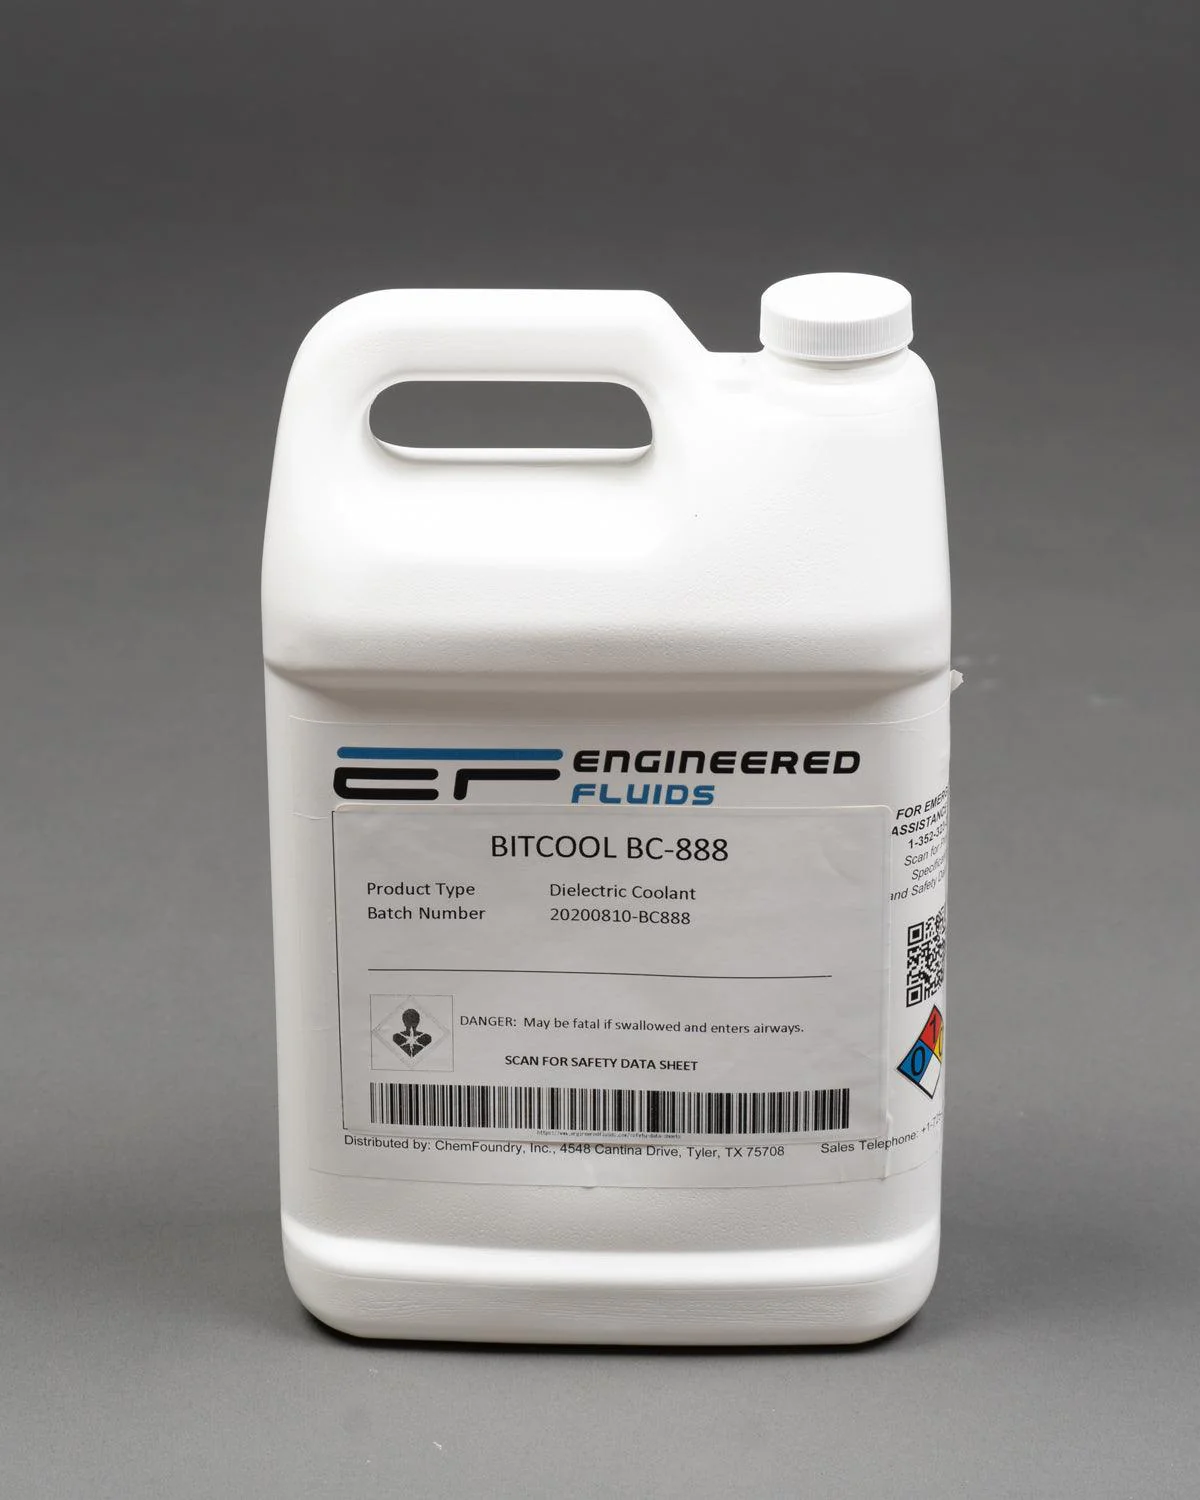 How long does BitCool Dielectric Coolant last?